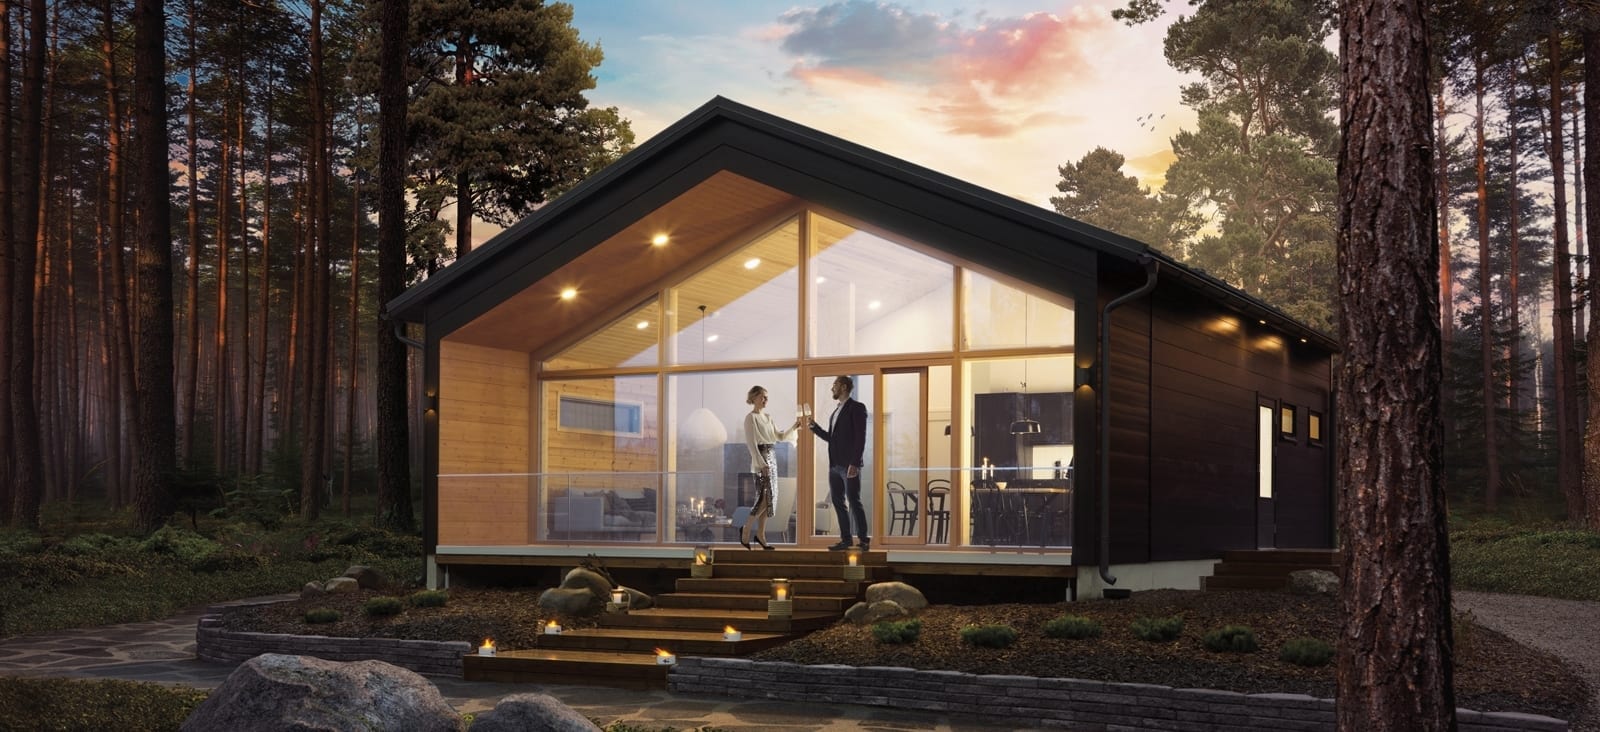 Honka log homes - Healthy houses inspired by Nordic nature